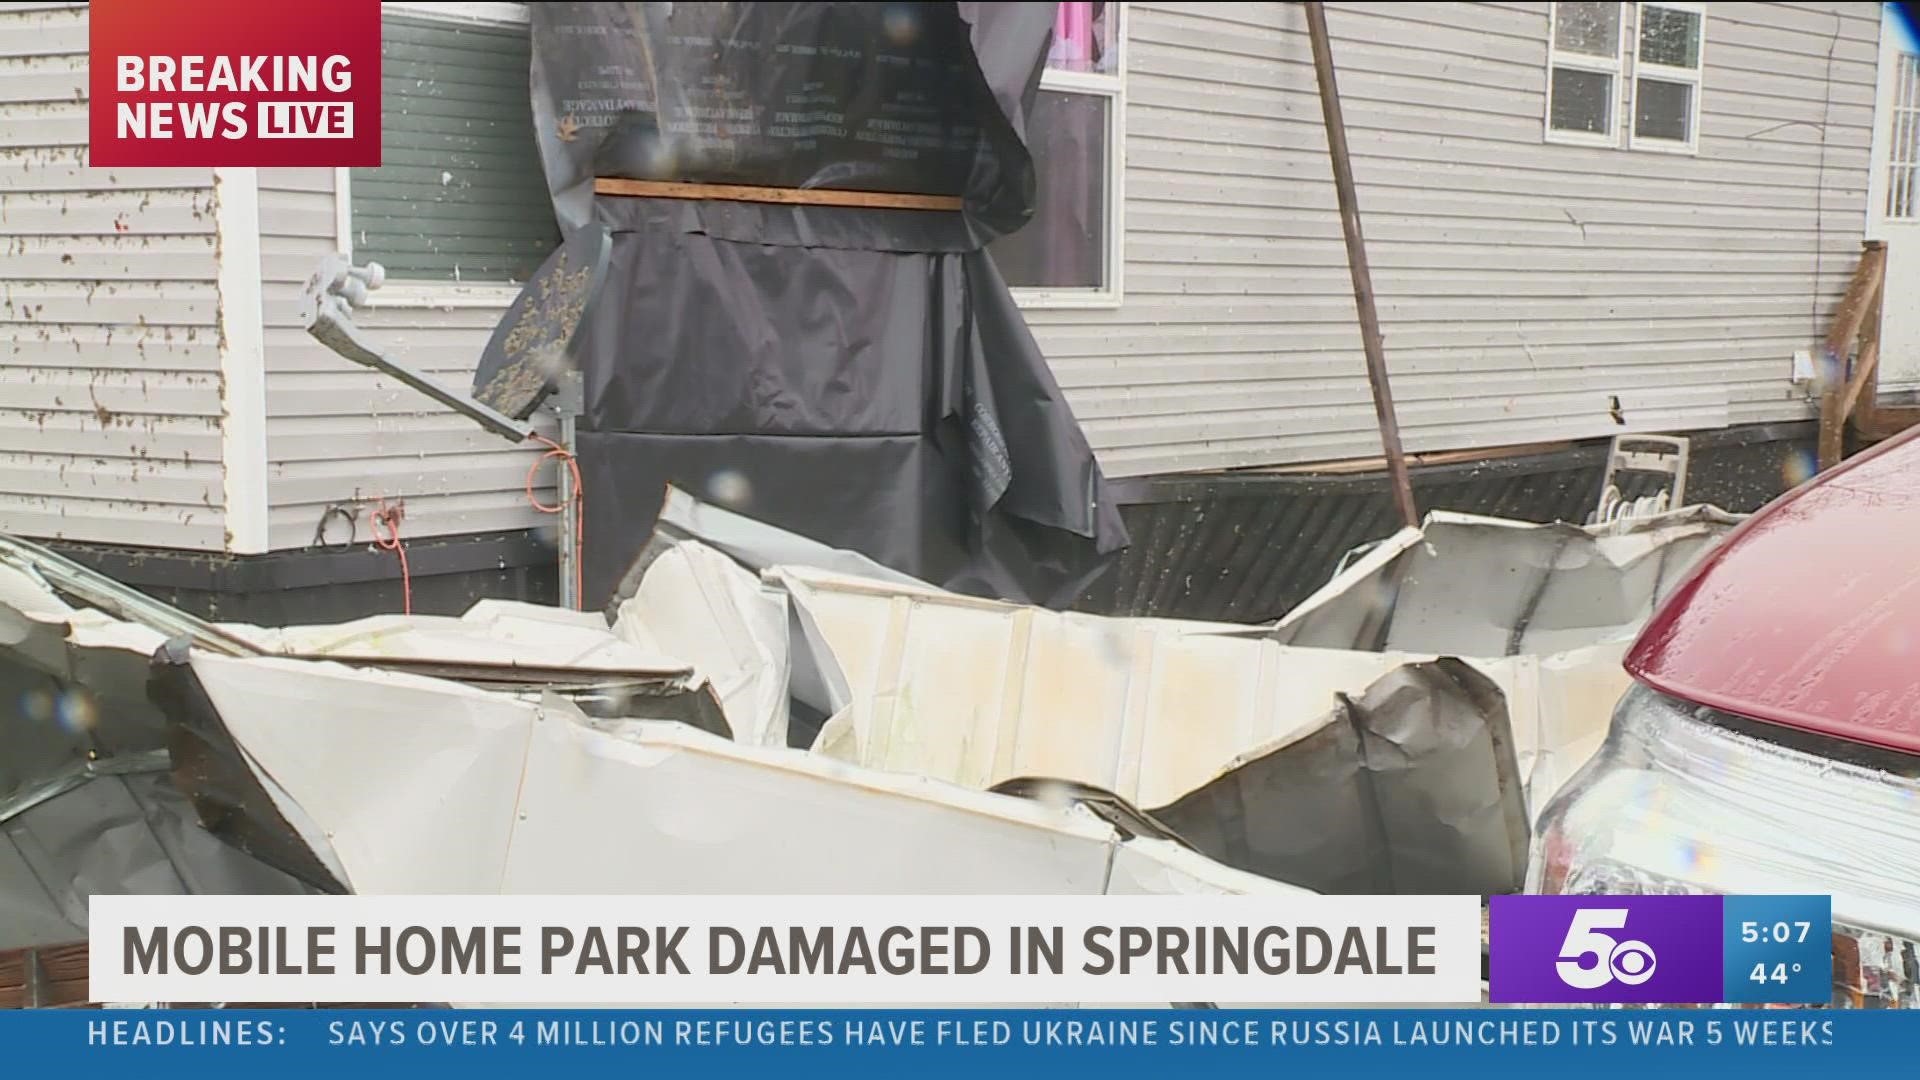 Residents of a mobile home Prak in Springdale are left to pick up the pieces after this morning's tornado ripped threw the area and left their homes in shambles.